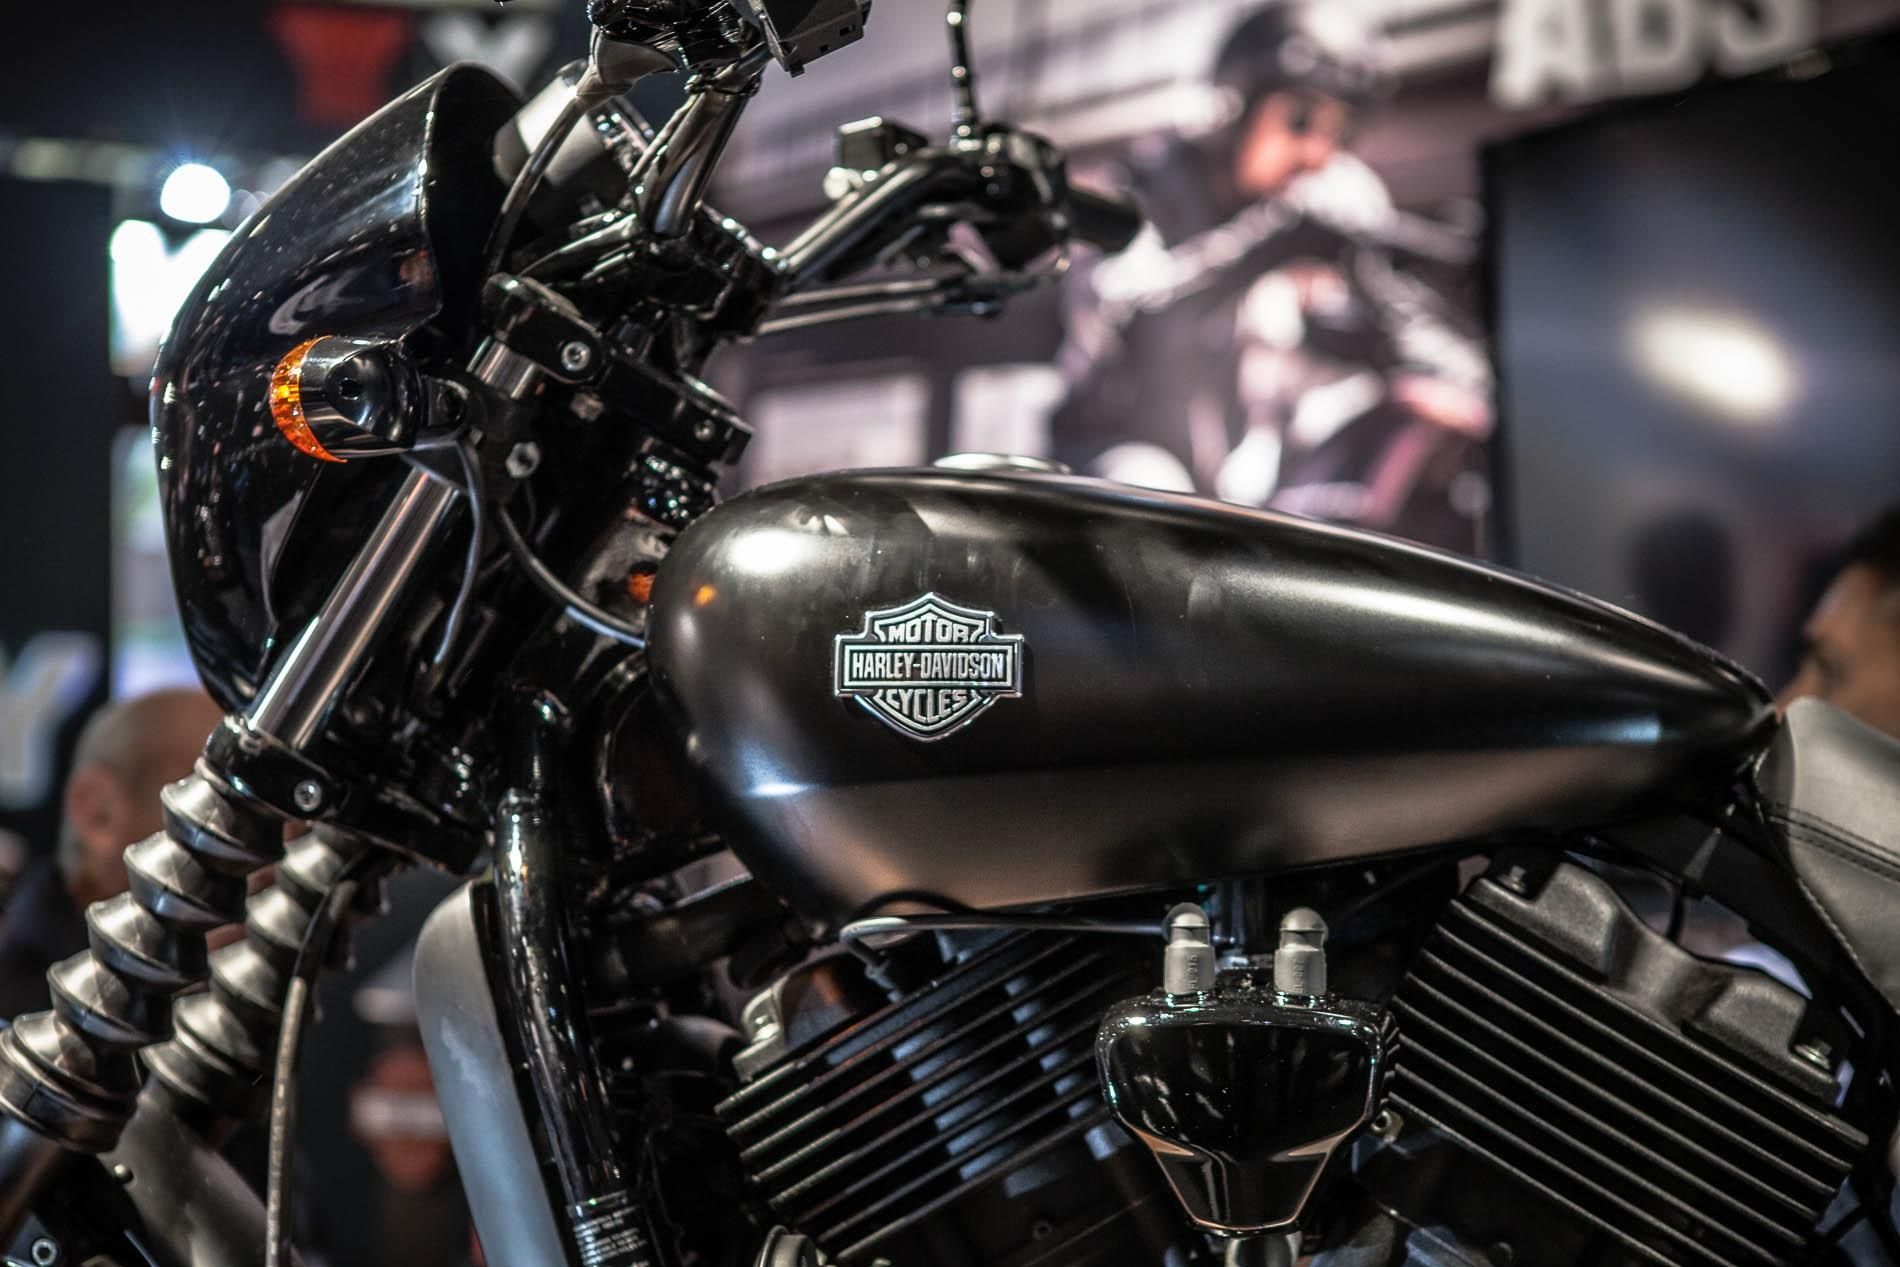 It may be smaller and less expensive, but the HD Street is still a Harley